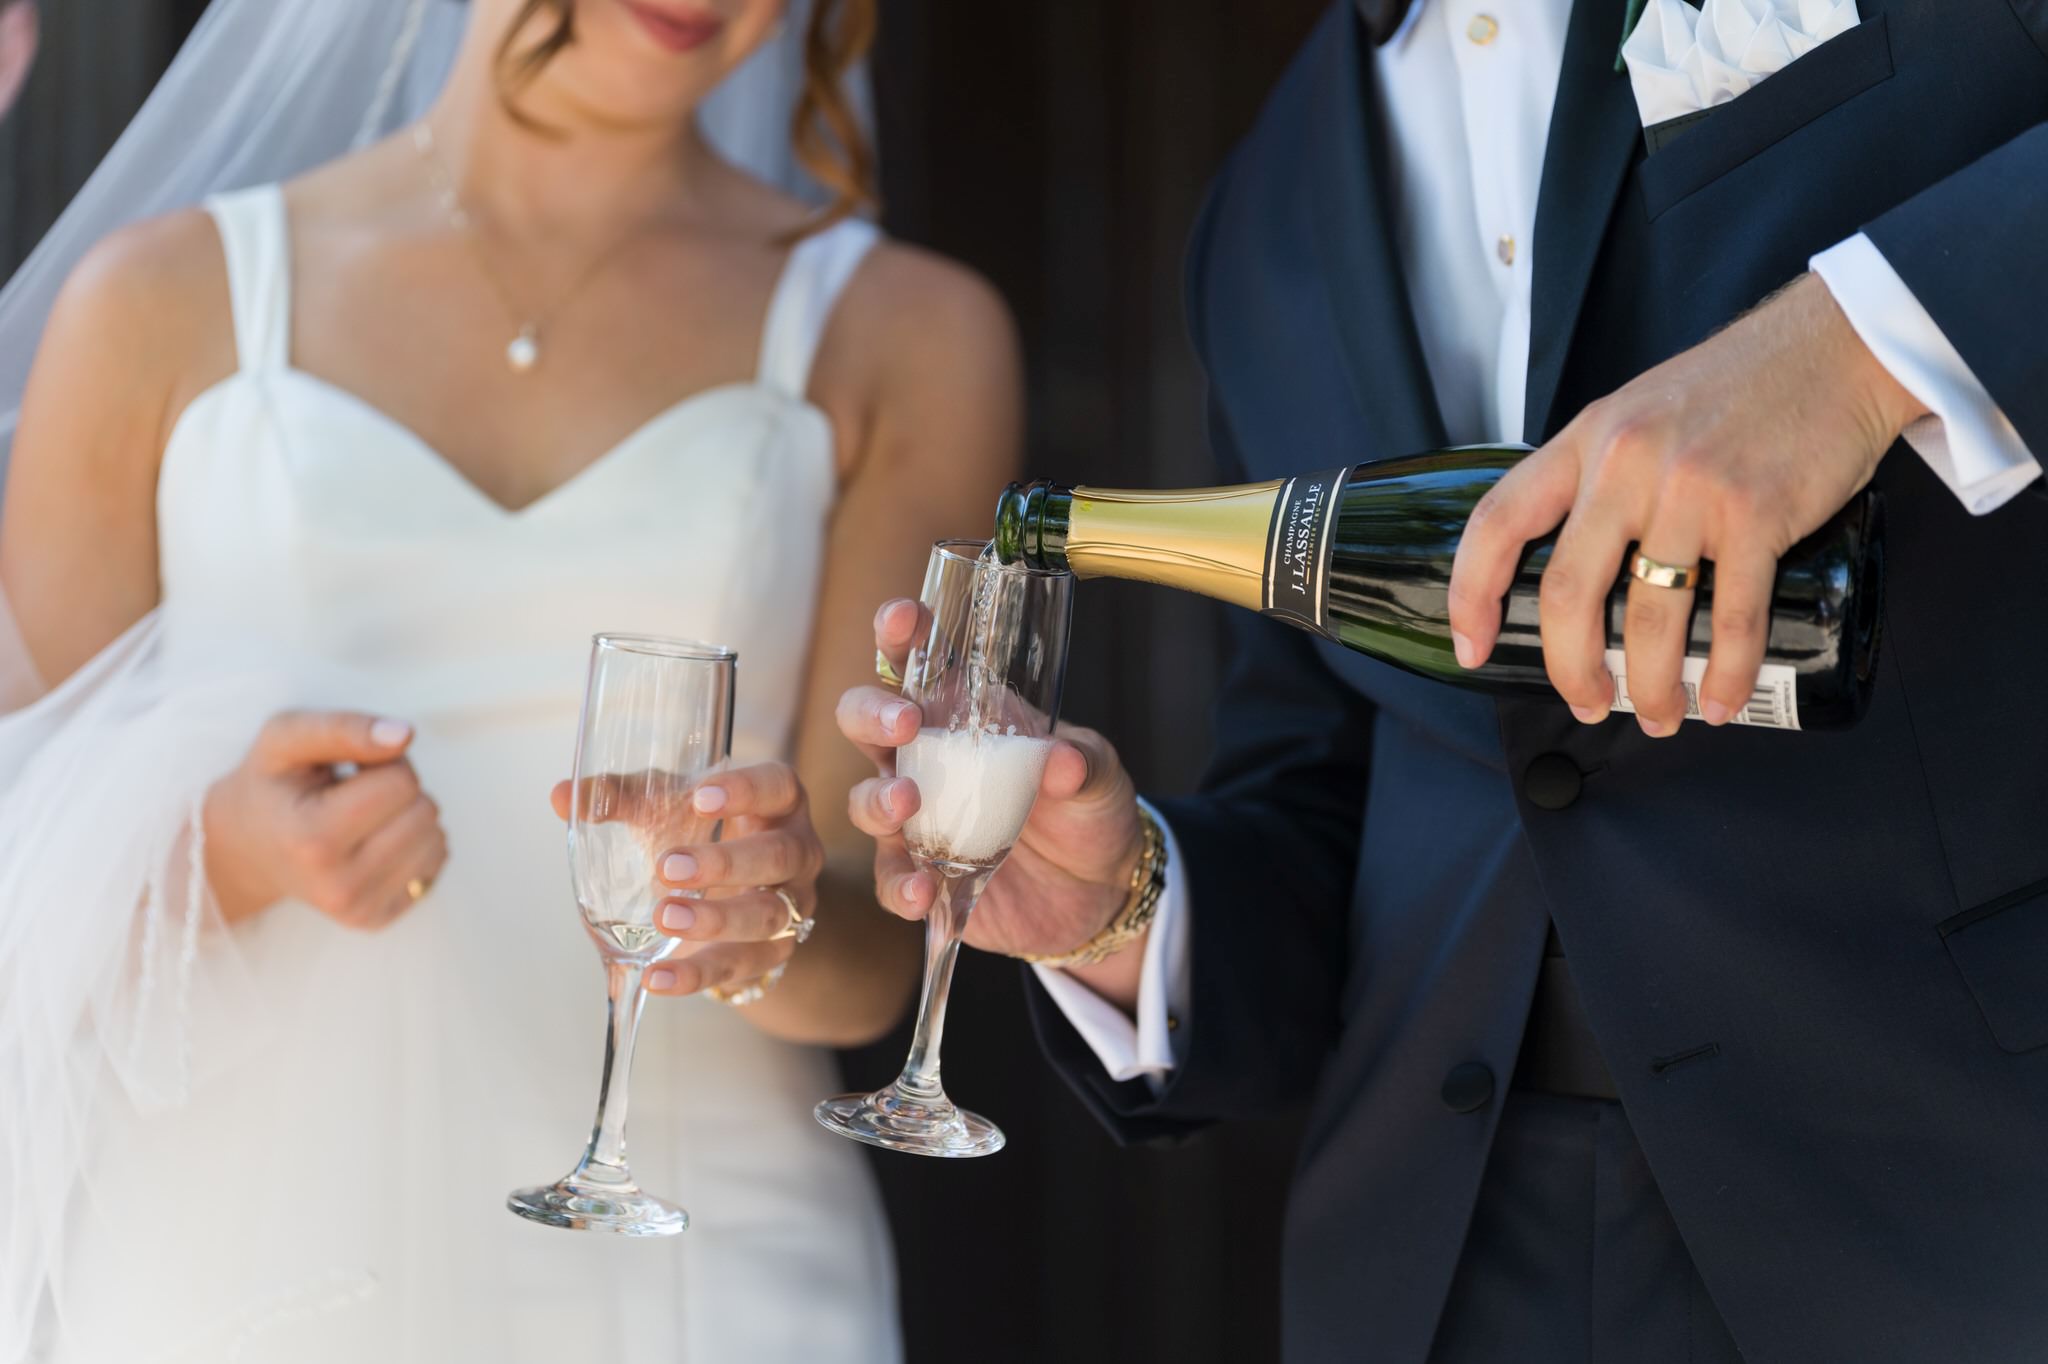 Champagne is poured into flutes with the bride and groom in the background.  